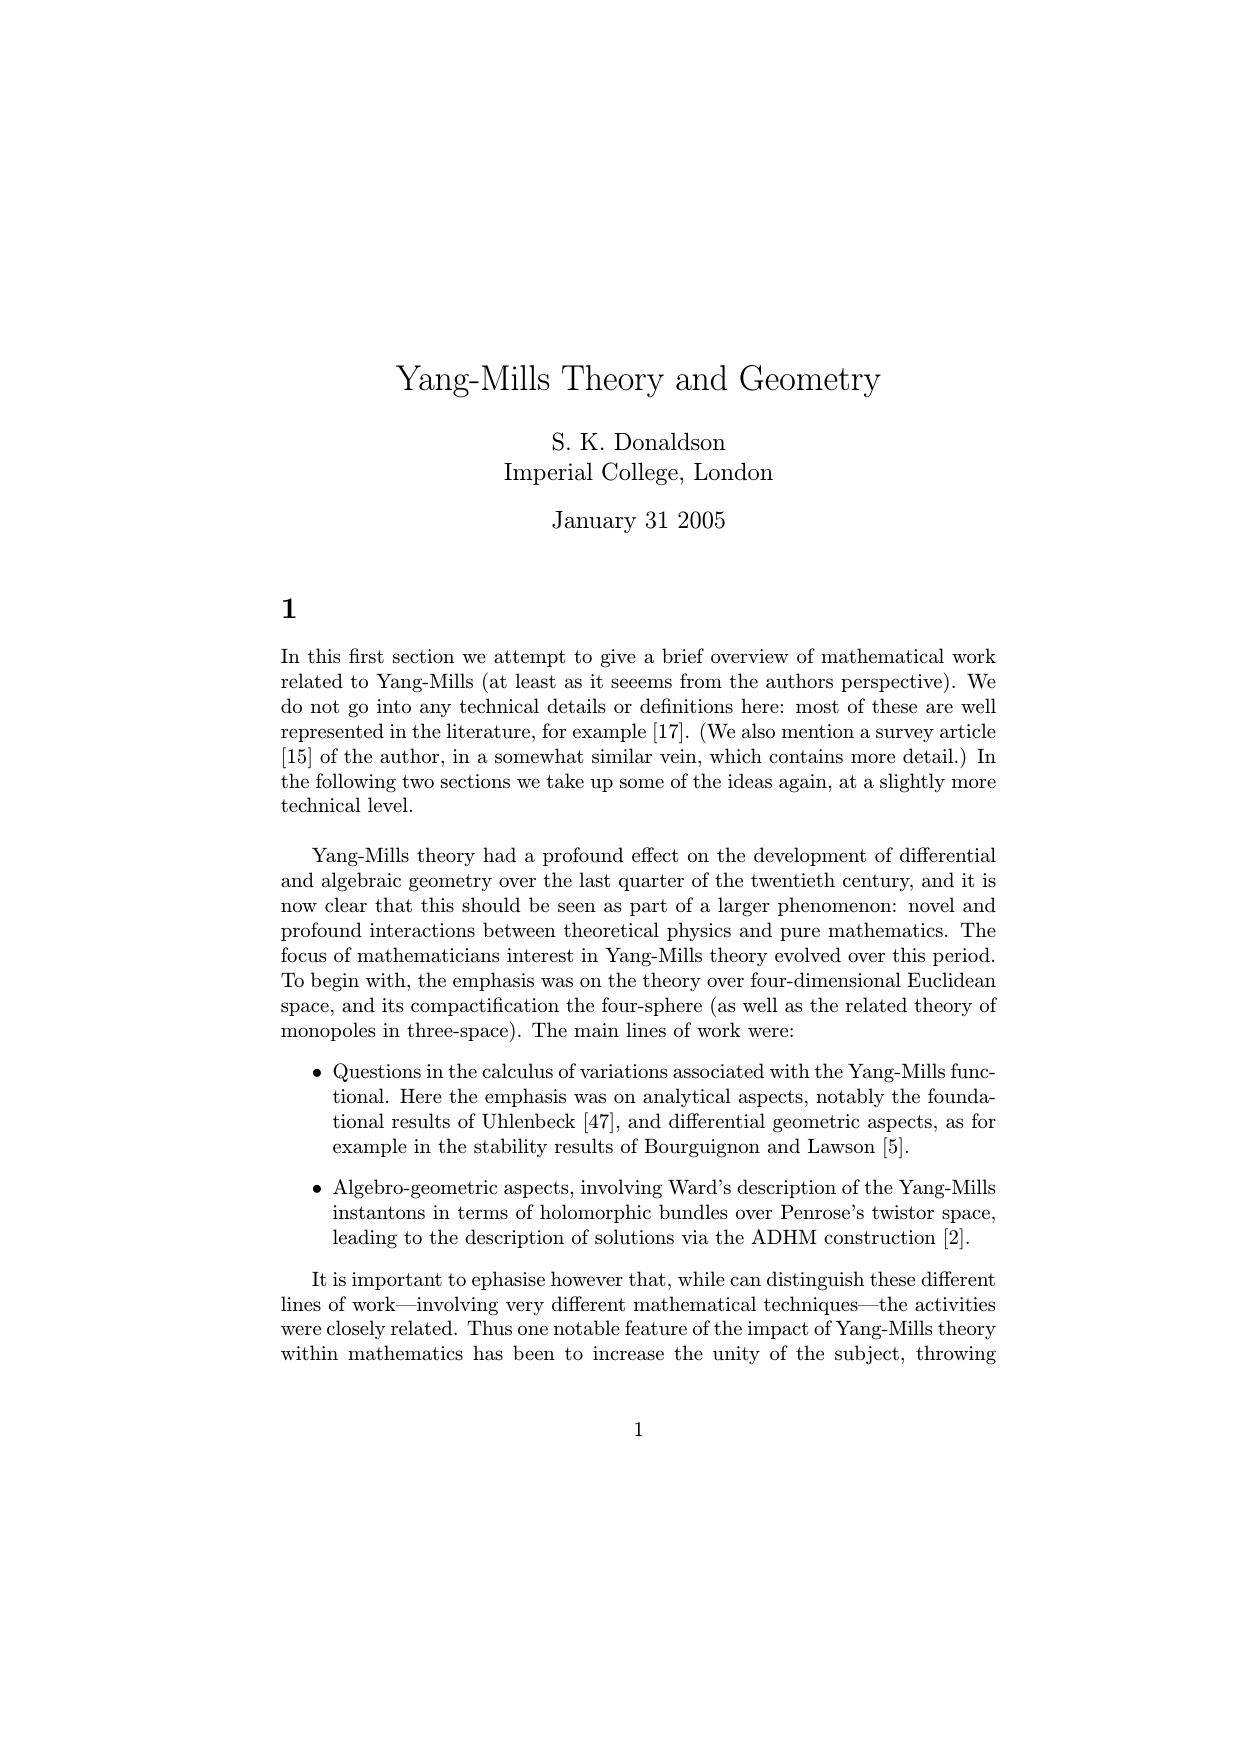 Yang-Mills Theory and Geometry - Article